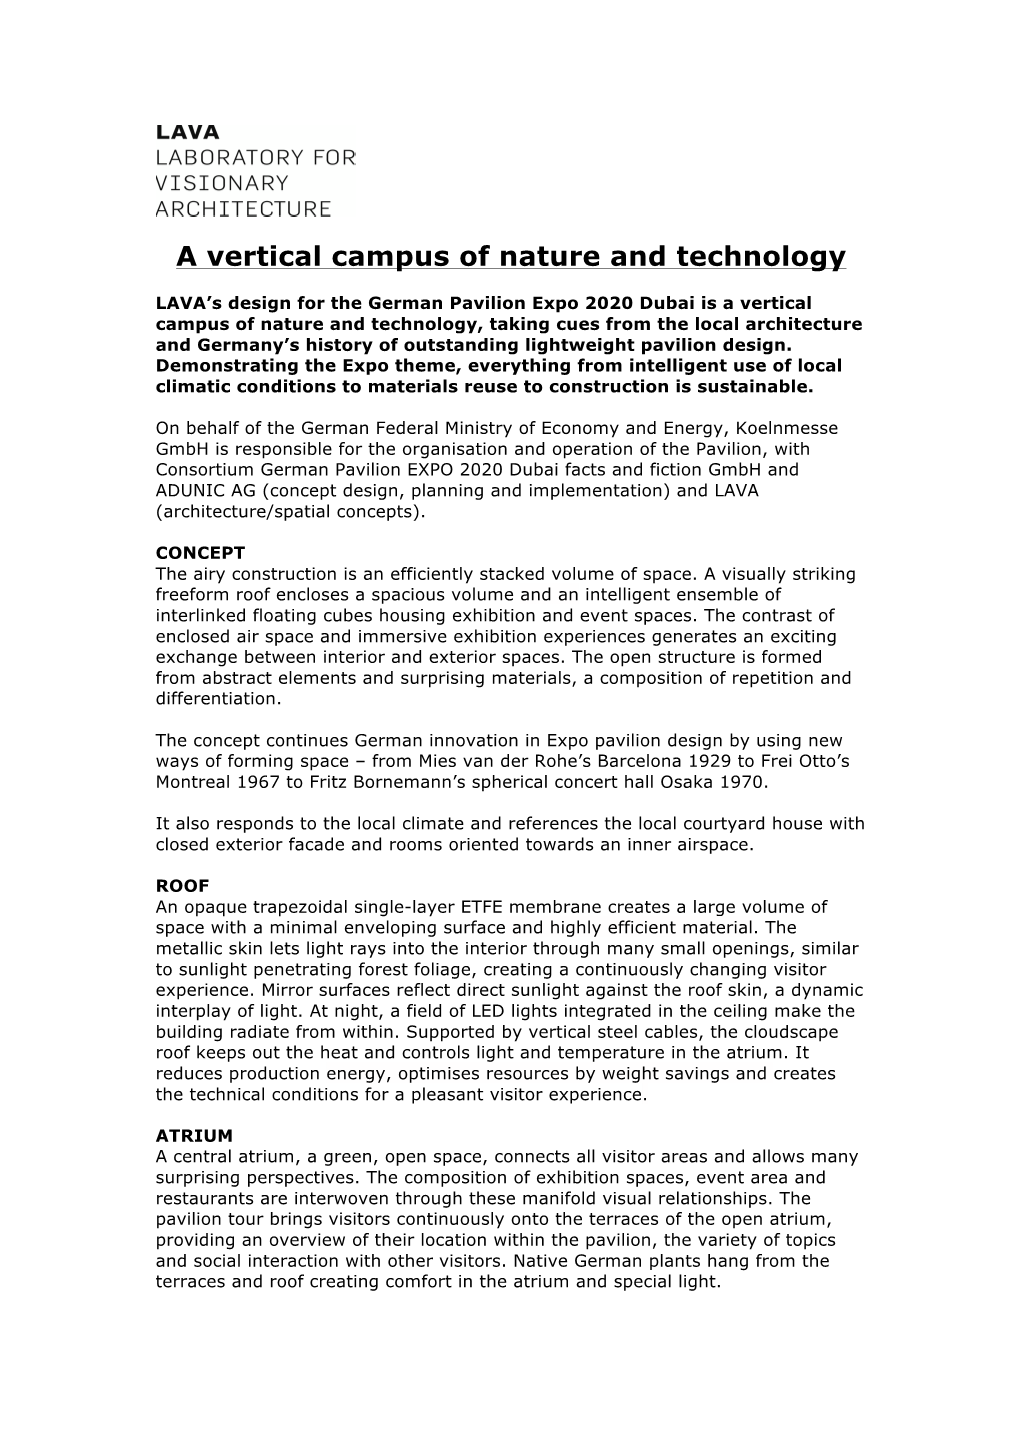 A Vertical Campus of Nature and Technology